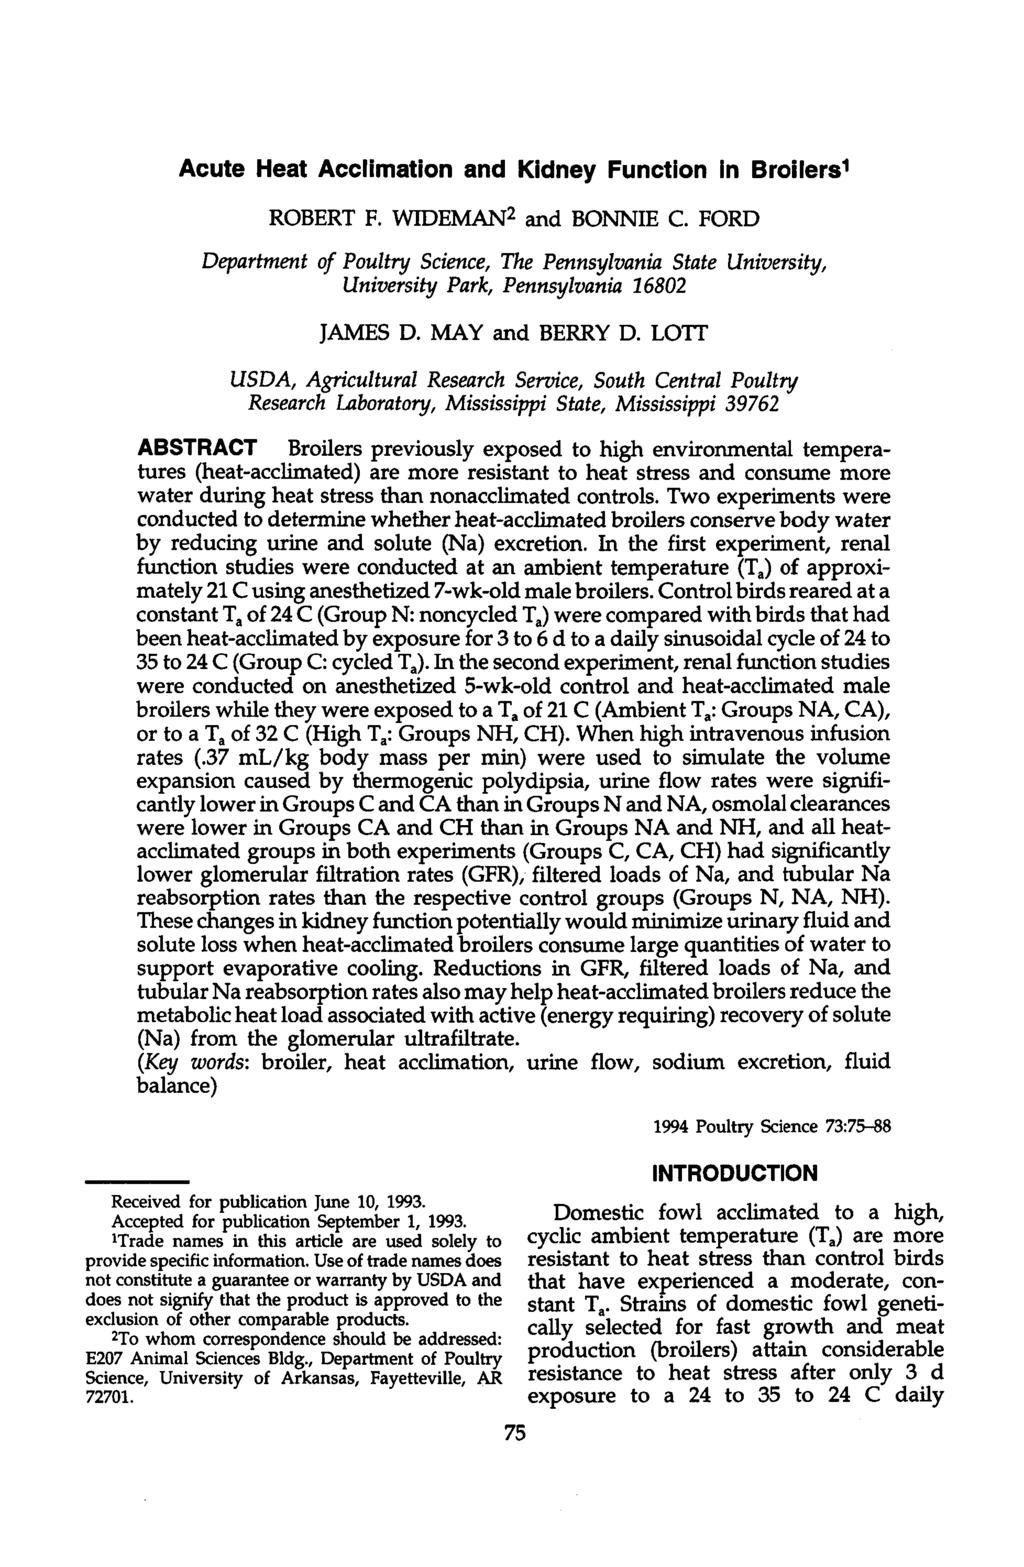 Acute Heat Acclimatin and Kidney Functin in Brilers 1 ROBERT F. WIDEMA 2 and BOIE. FORD Department f Pultry Science, The Pennsylvania State University, University Park, Pennsylvania 16802 JAMES D.